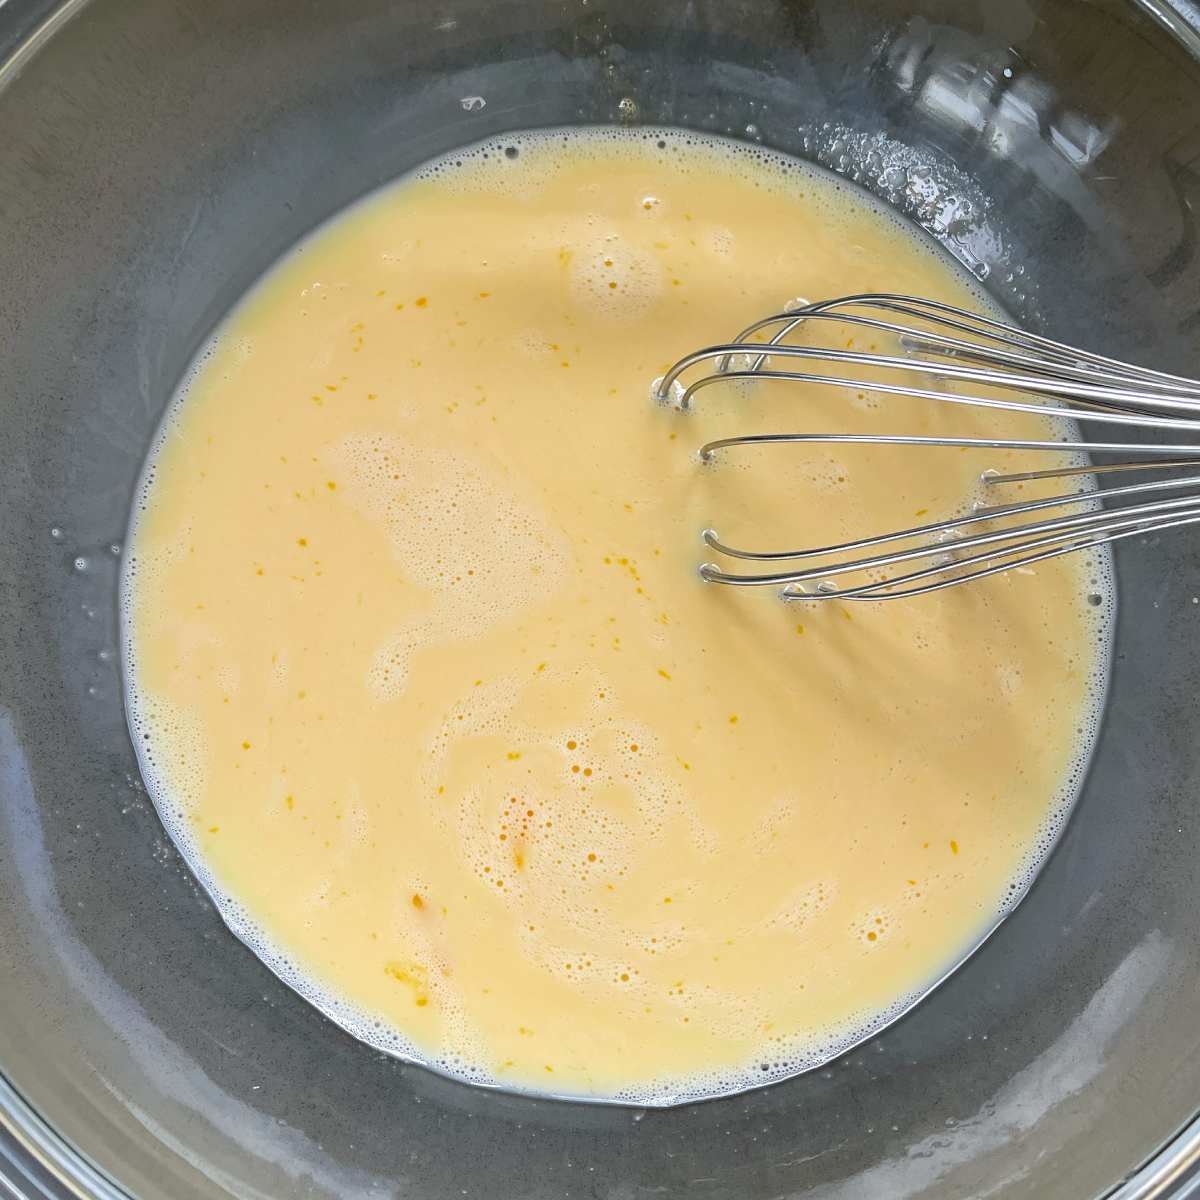 Eggs whisked together in a bowl.